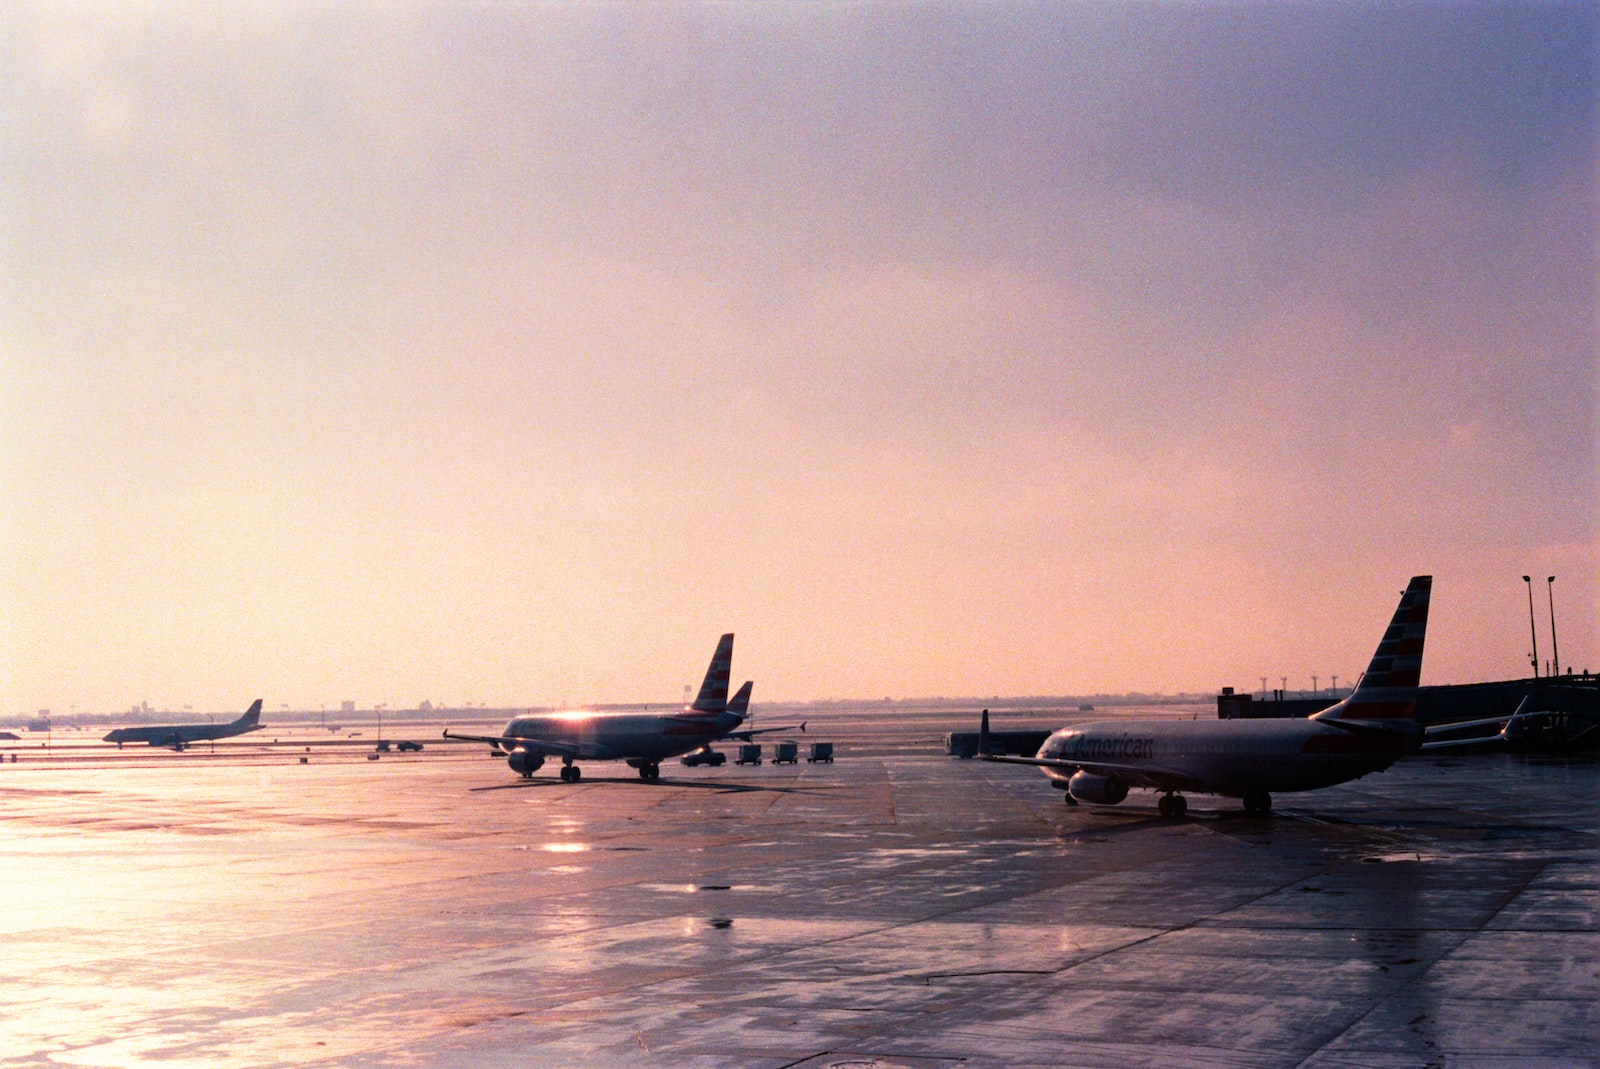 planes at airport during daytime